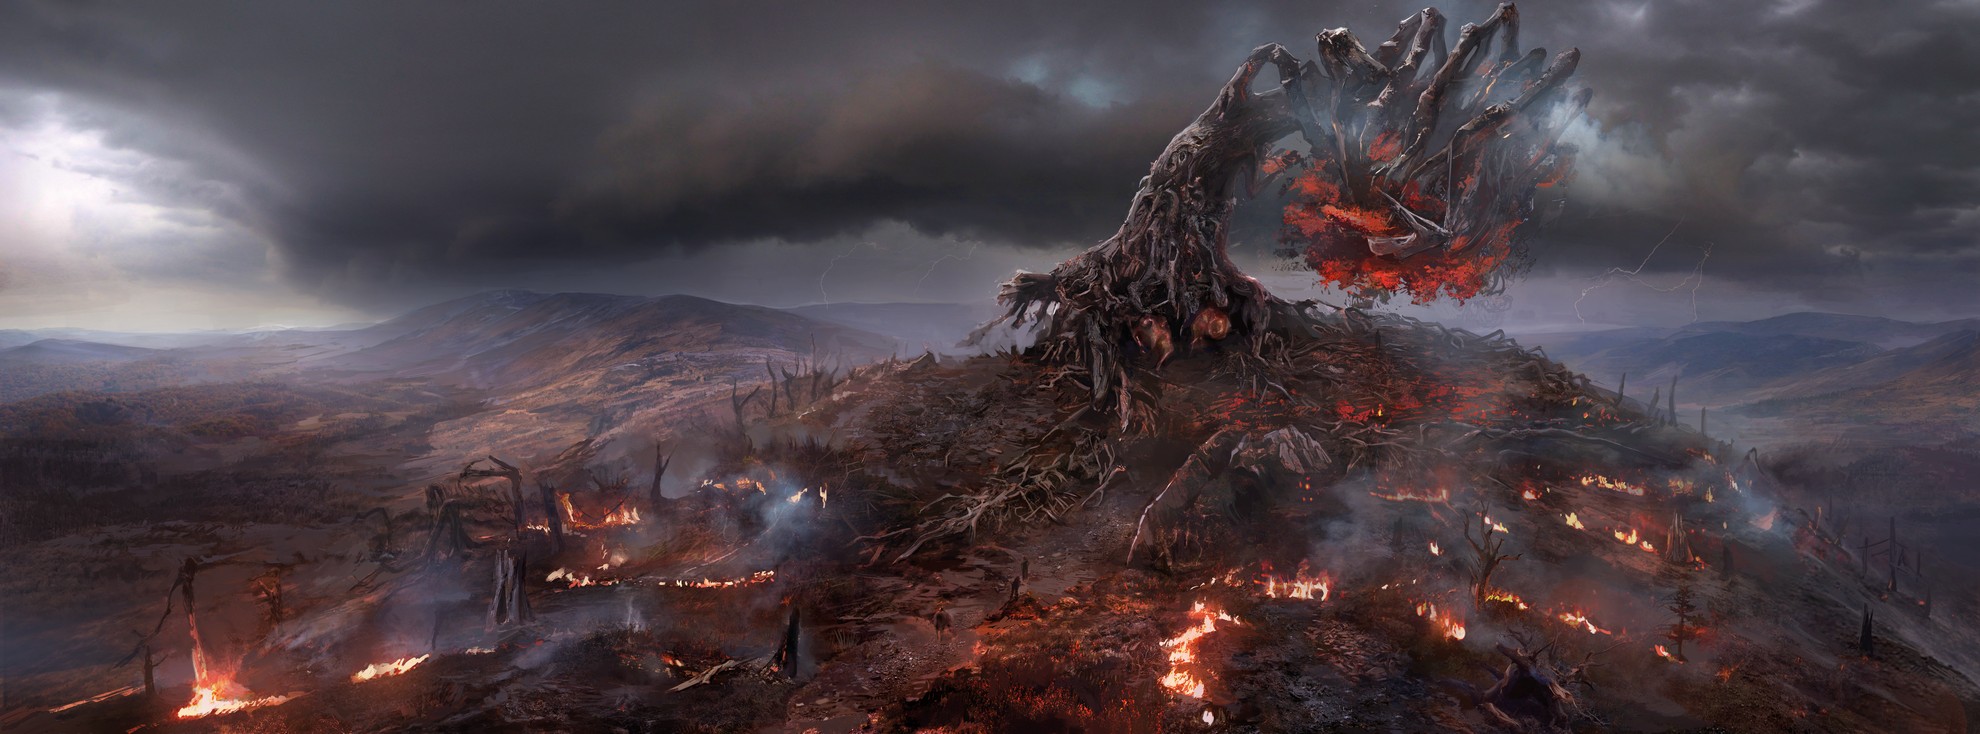 the witcher-3-a-demonic-tree-among-conflagration